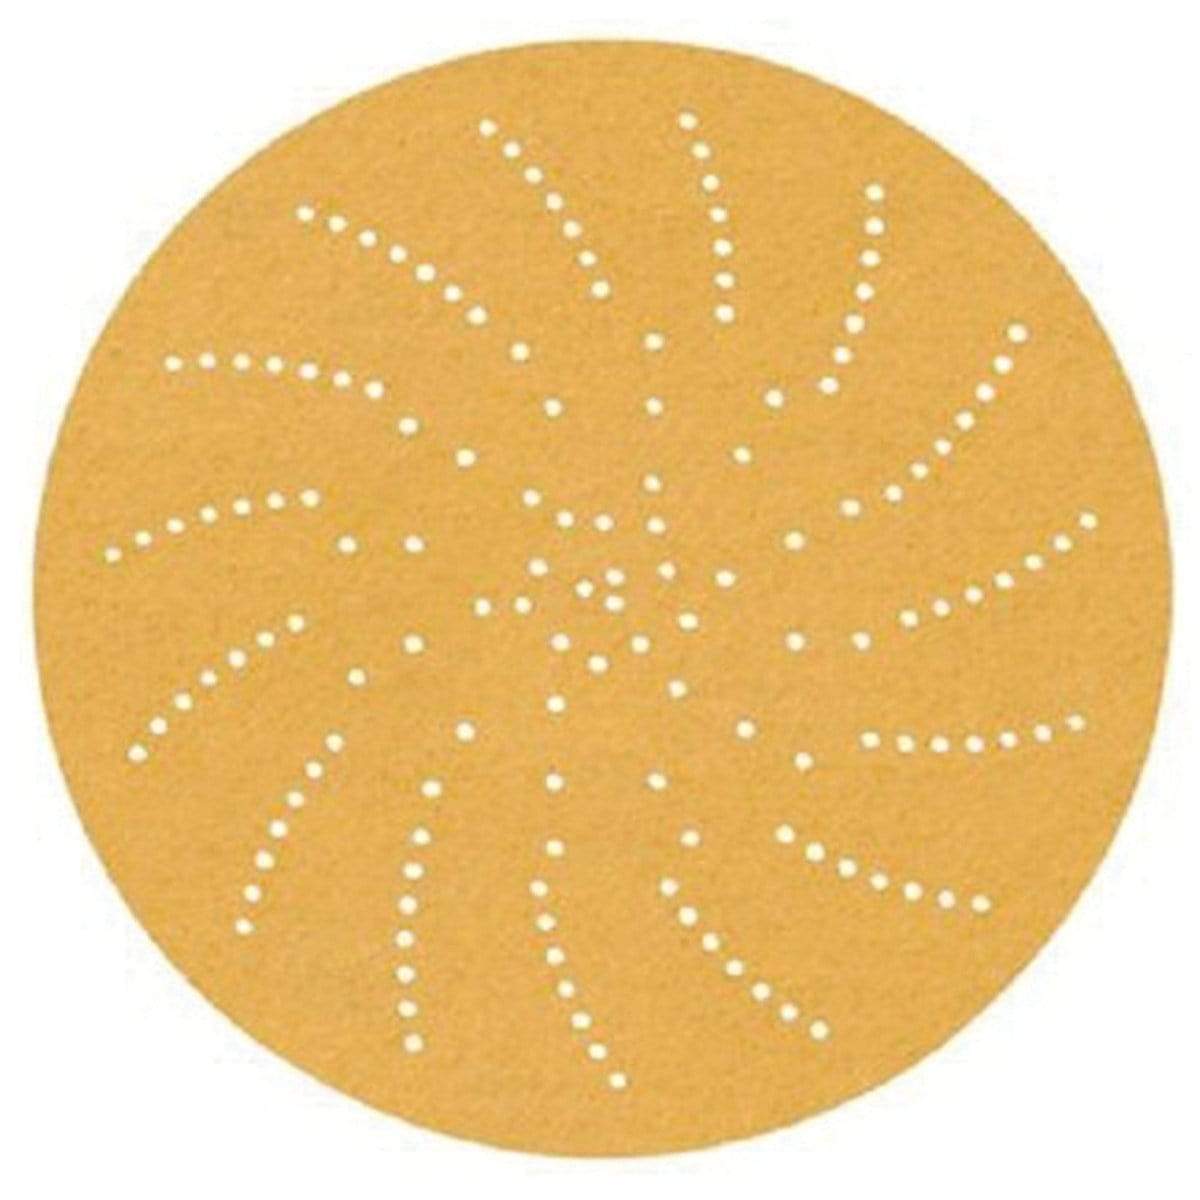 3M Marine Qualifies for Free Shipping 3M Clean Sanding Disc 6" P400 Grit 50 Per Box #55514